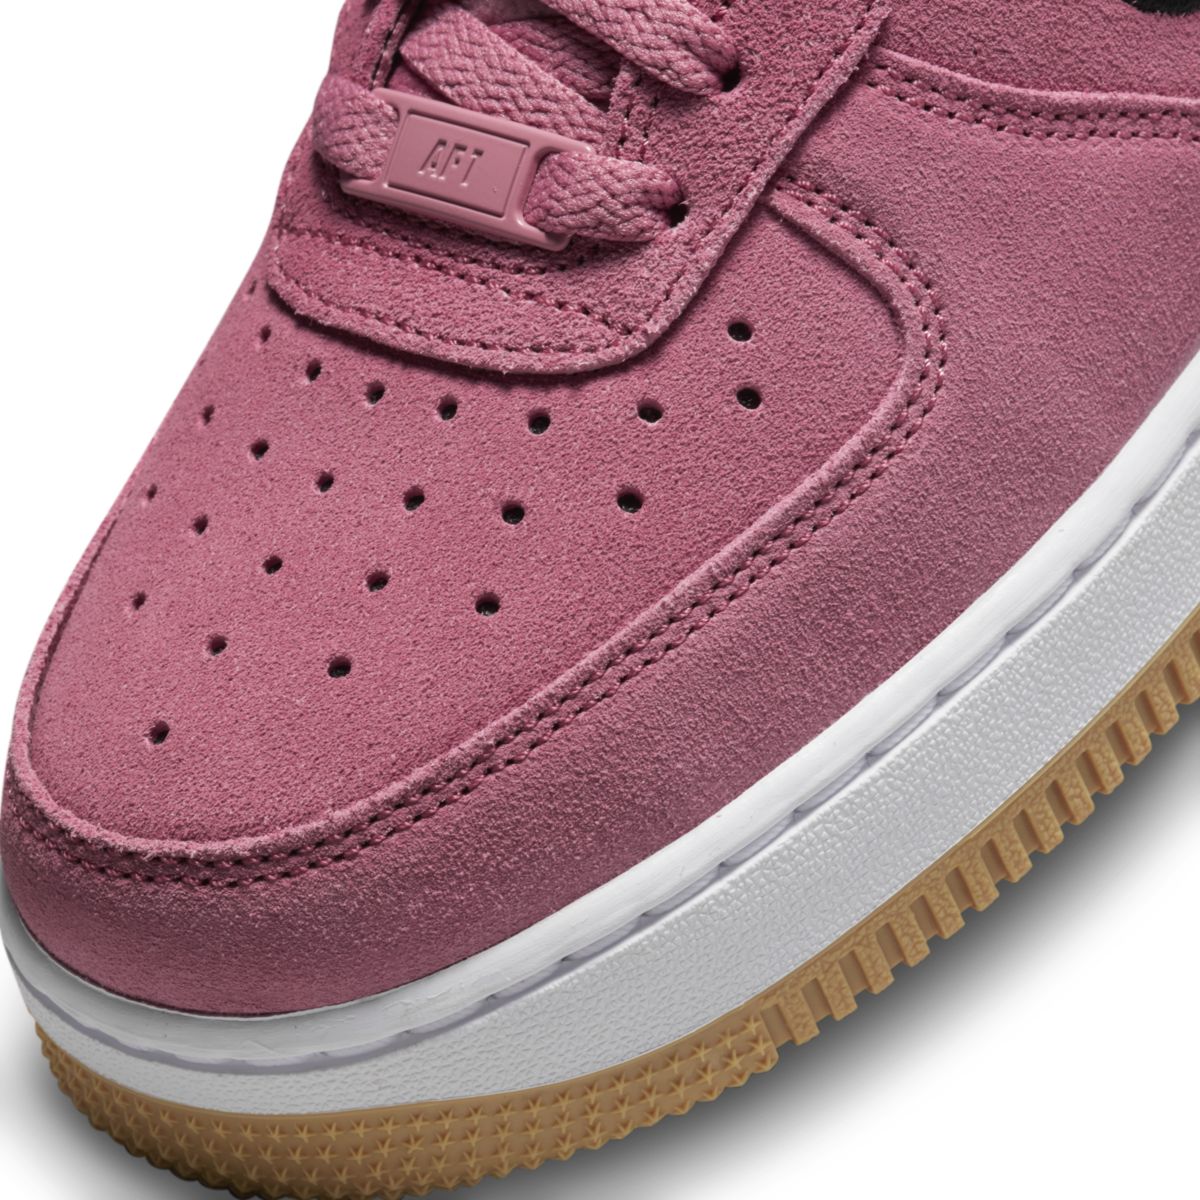 Nike Air Force 1 Low Desert Berry DQ7583-600 7